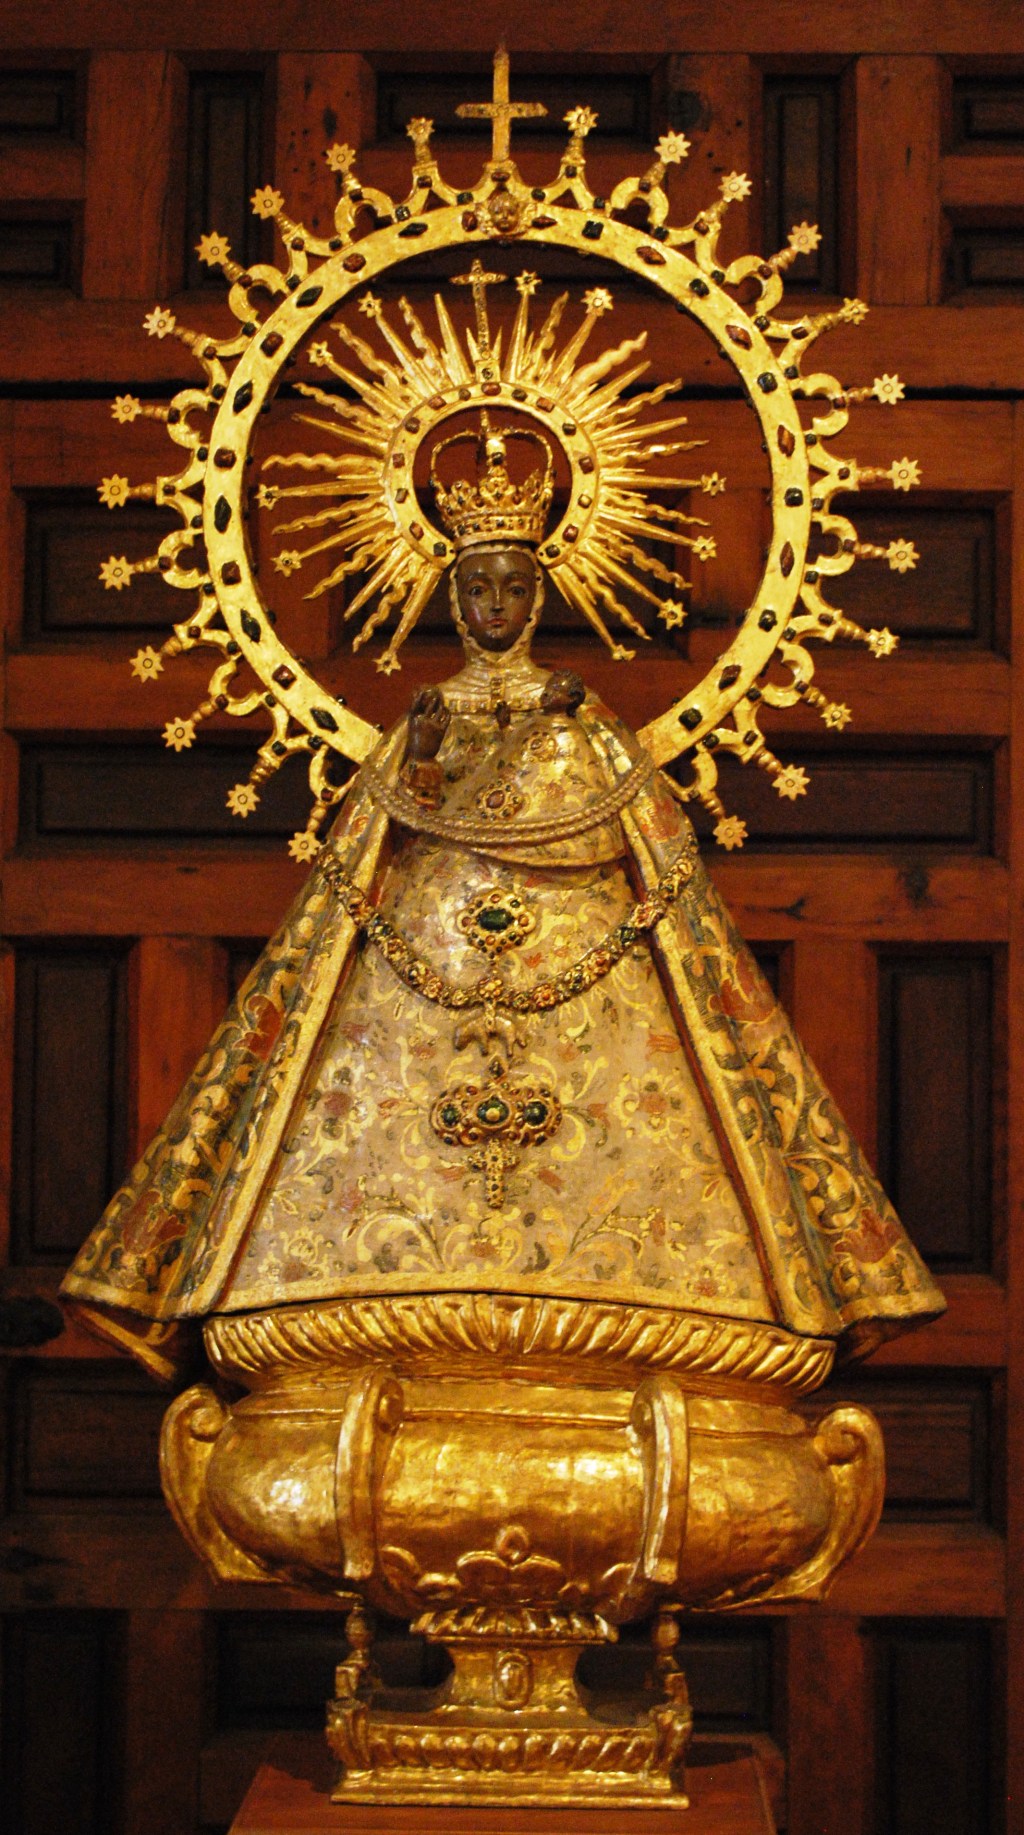 Our Lady of Atocha statue in Madrid